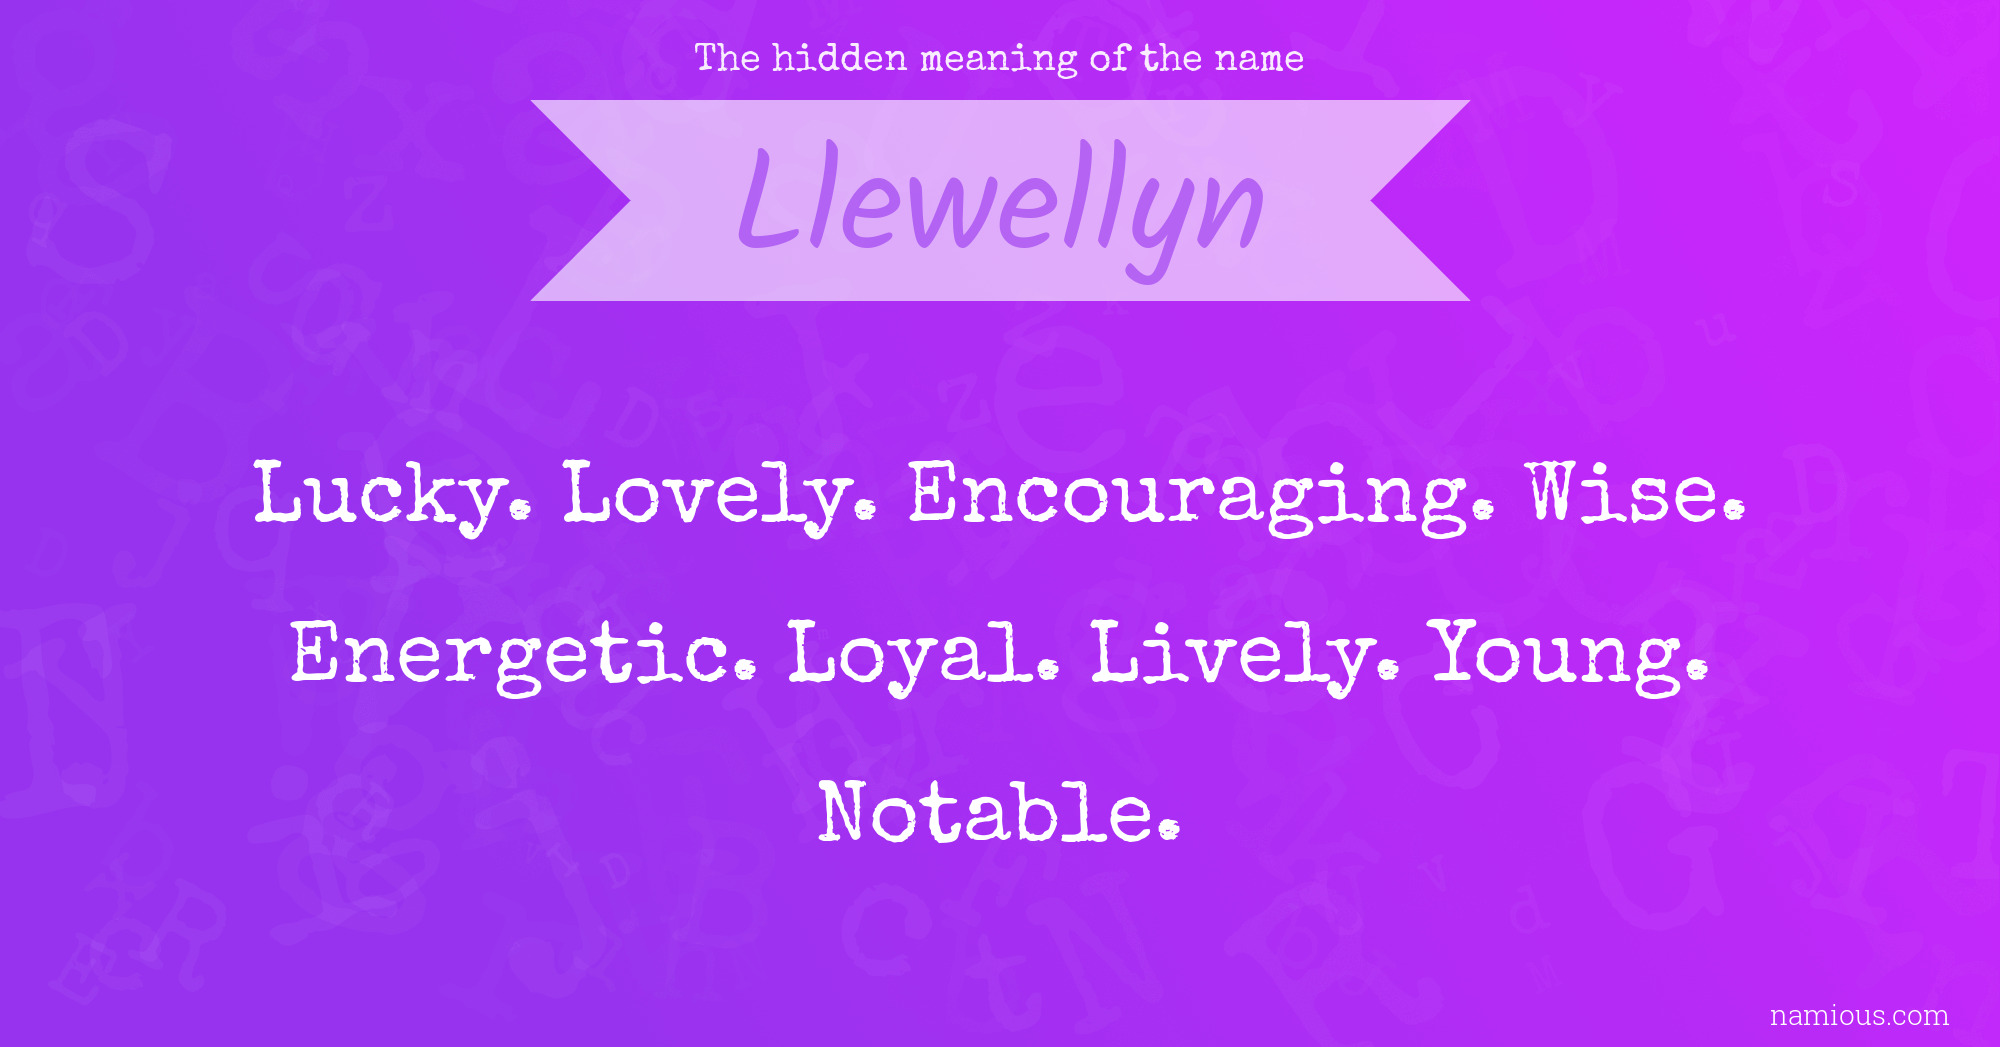 The hidden meaning of the name Llewellyn